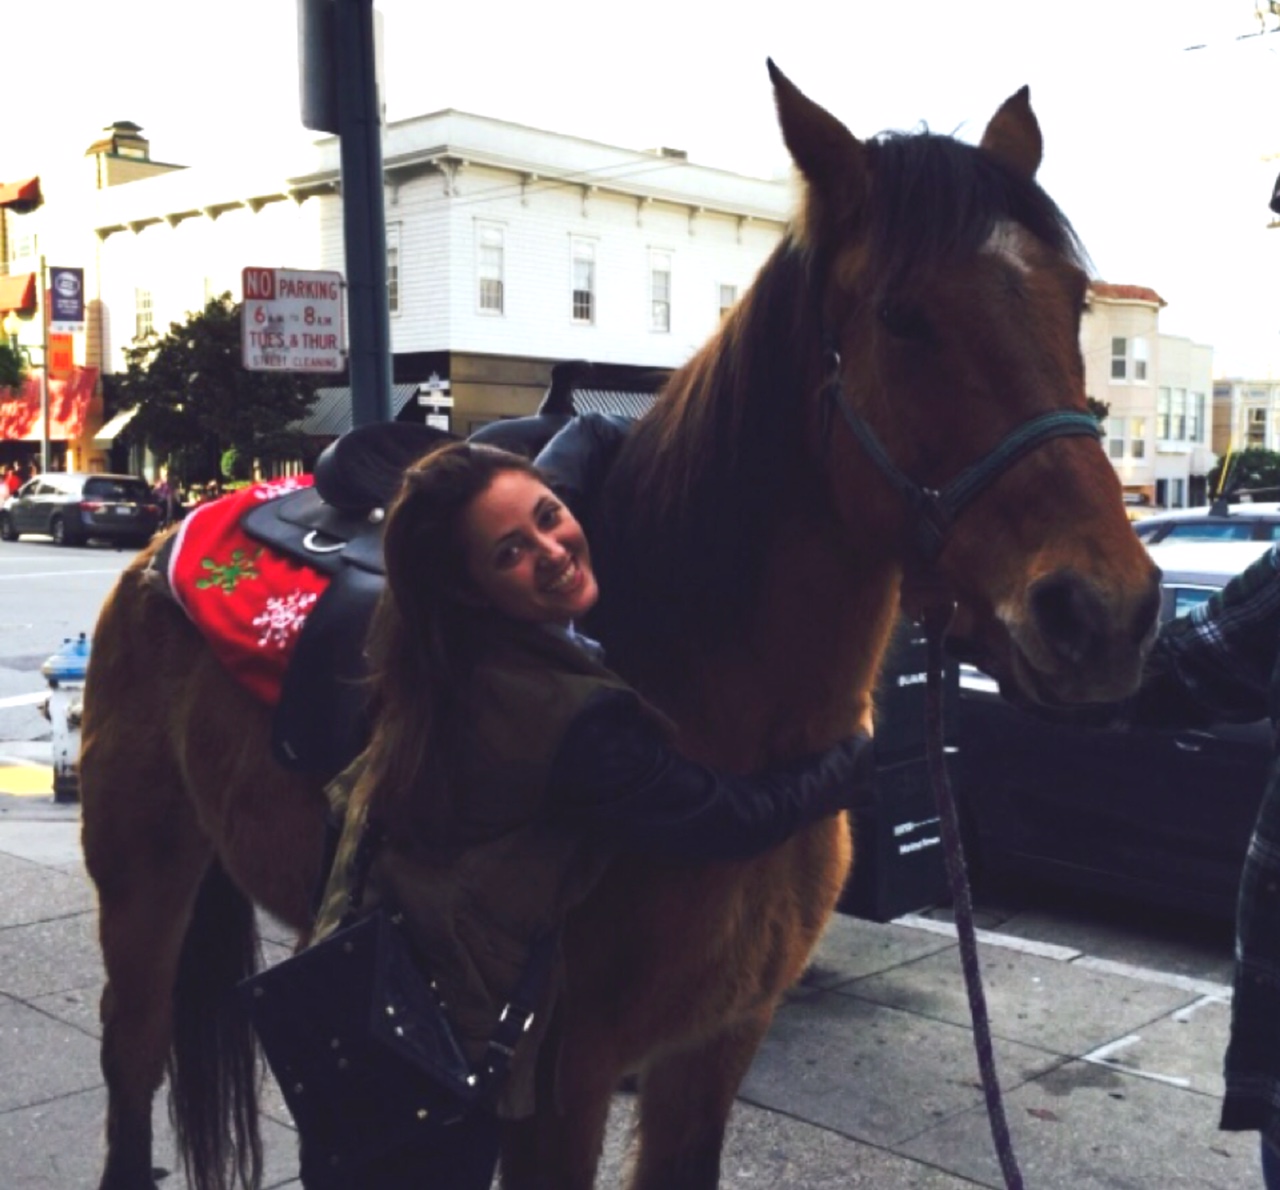 Horse on the street of SF